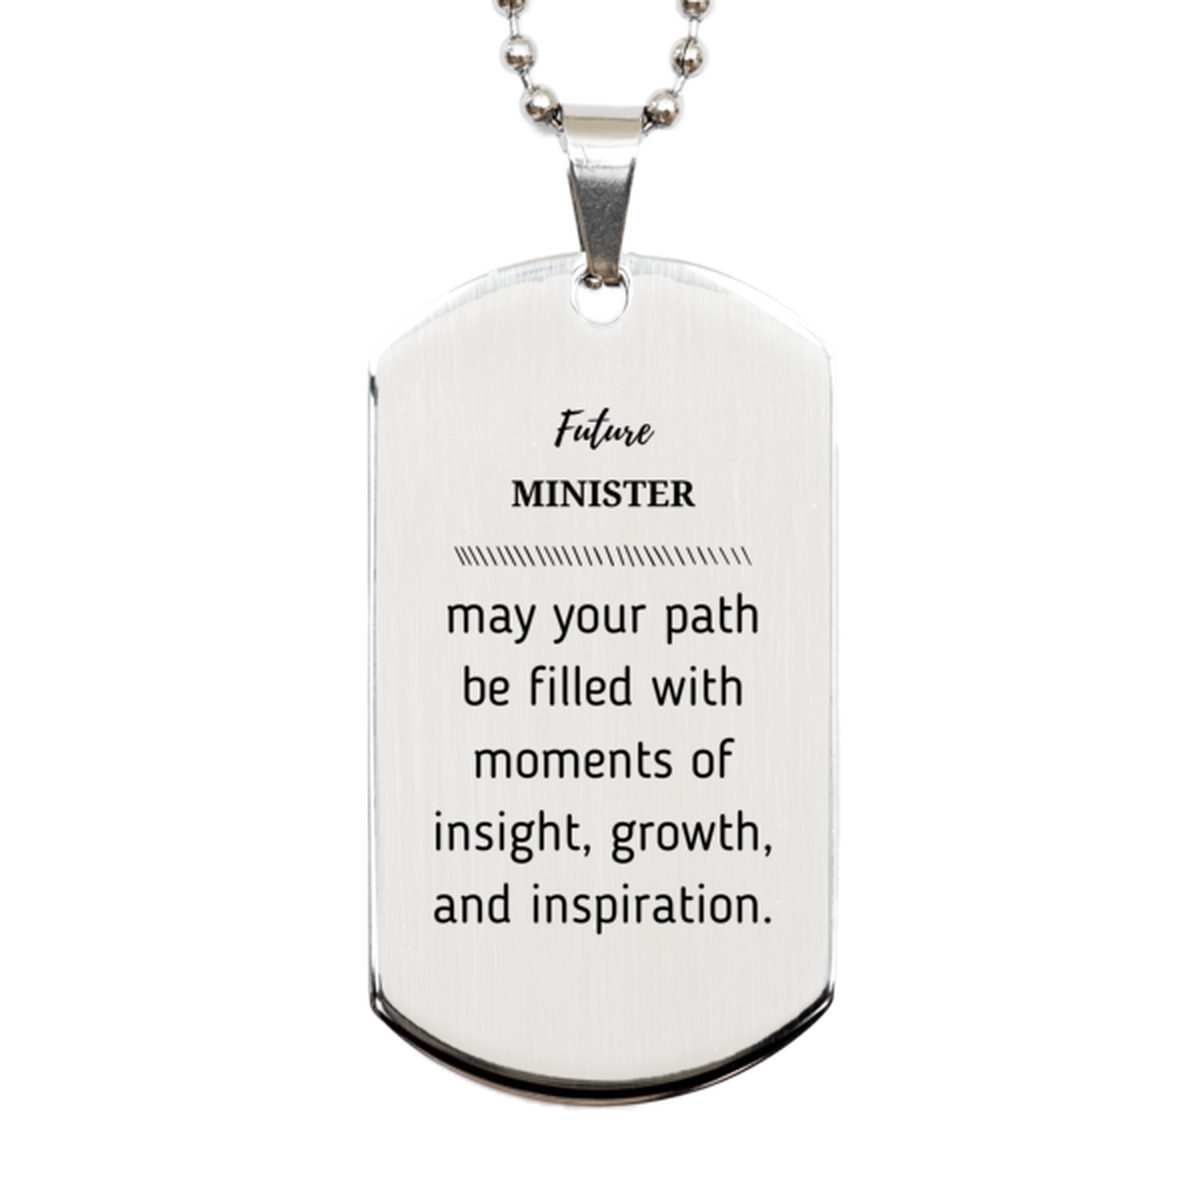 Future Minister Gifts, May your path be filled with moments of insight, Graduation Gifts for New Minister, Christmas Unique Silver Dog Tag For Men, Women, Friends